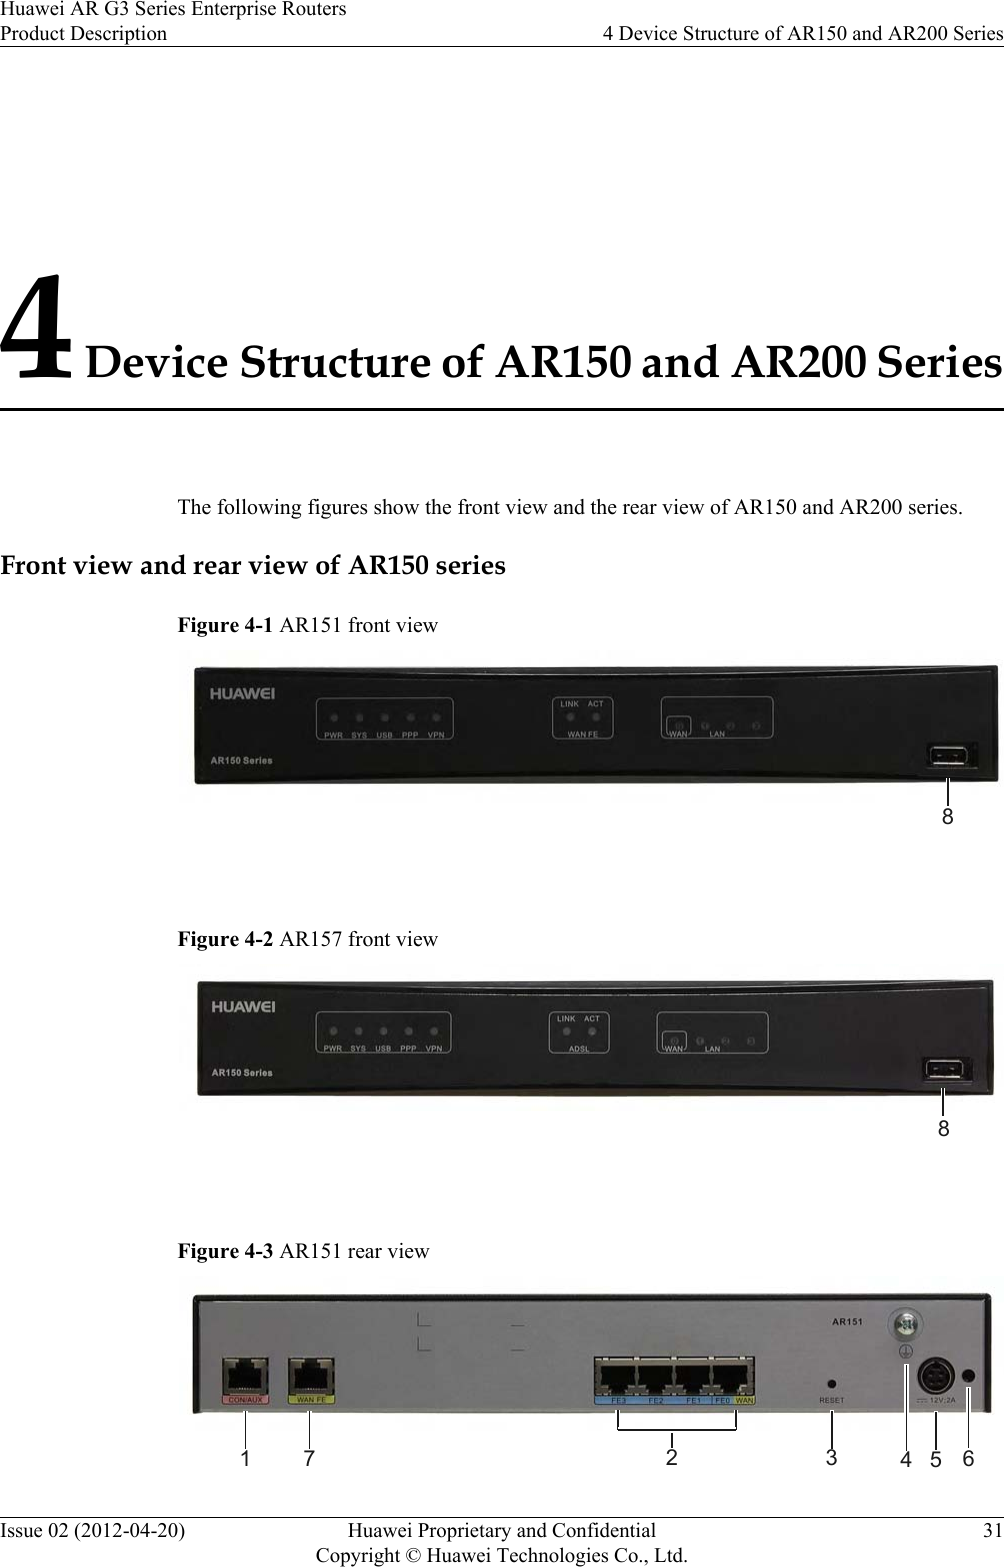 4 Device Structure of AR150 and AR200 SeriesThe following figures show the front view and the rear view of AR150 and AR200 series.Front view and rear view of AR150 seriesFigure 4-1 AR151 front view8 Figure 4-2 AR157 front view8 Figure 4-3 AR151 rear view1 7 2 3 564Huawei AR G3 Series Enterprise RoutersProduct Description 4 Device Structure of AR150 and AR200 SeriesIssue 02 (2012-04-20) Huawei Proprietary and ConfidentialCopyright © Huawei Technologies Co., Ltd.31